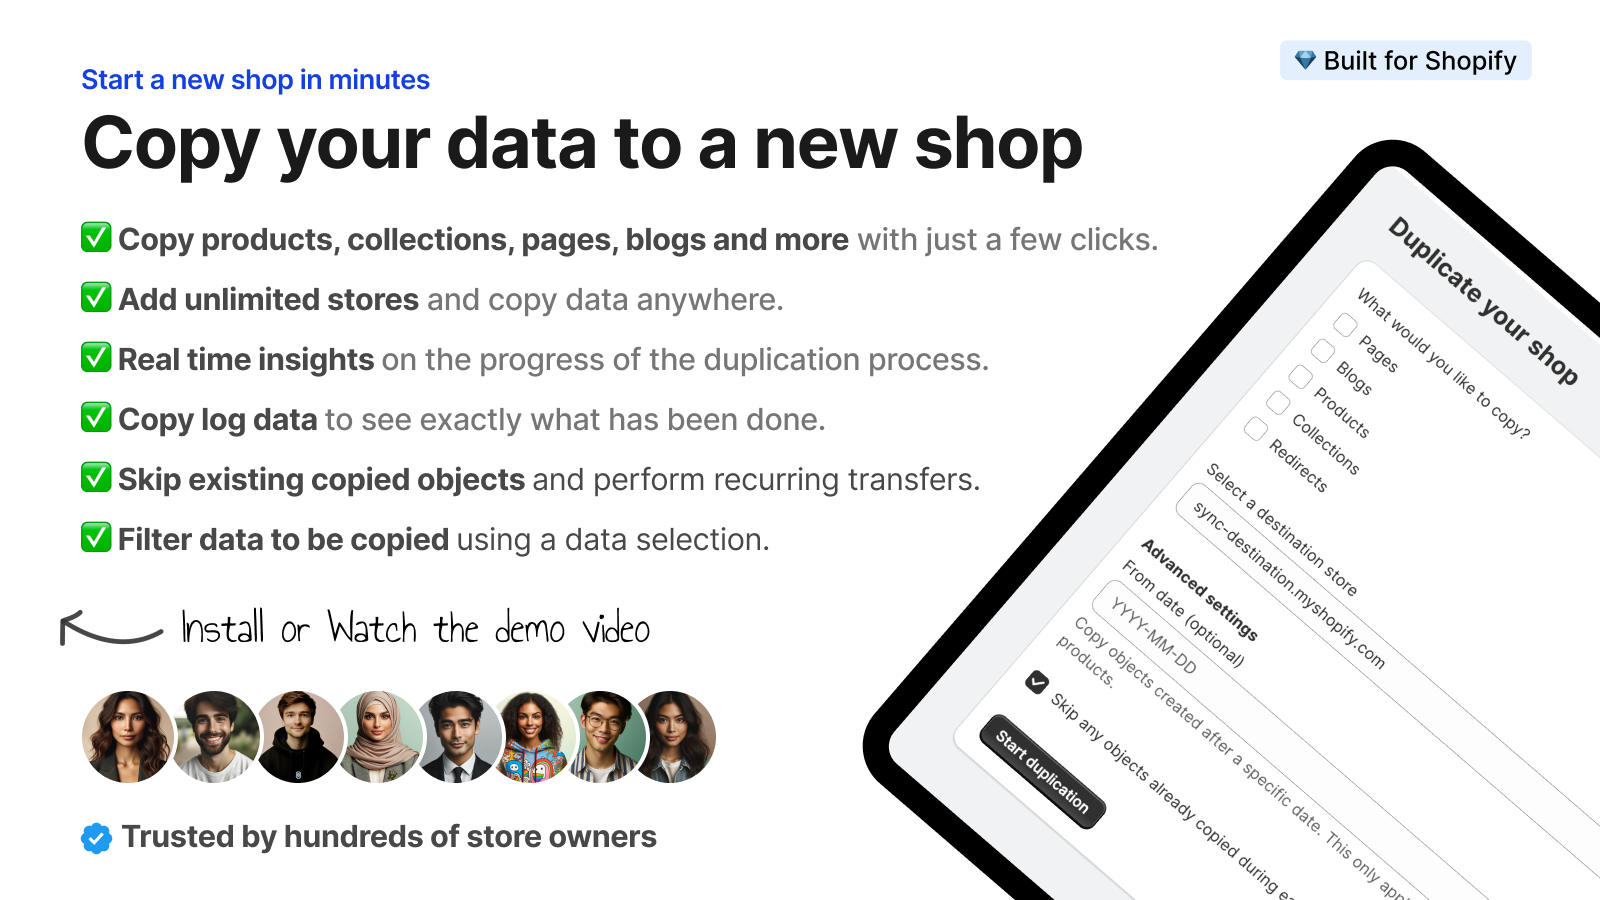 Copy your data to a new shop